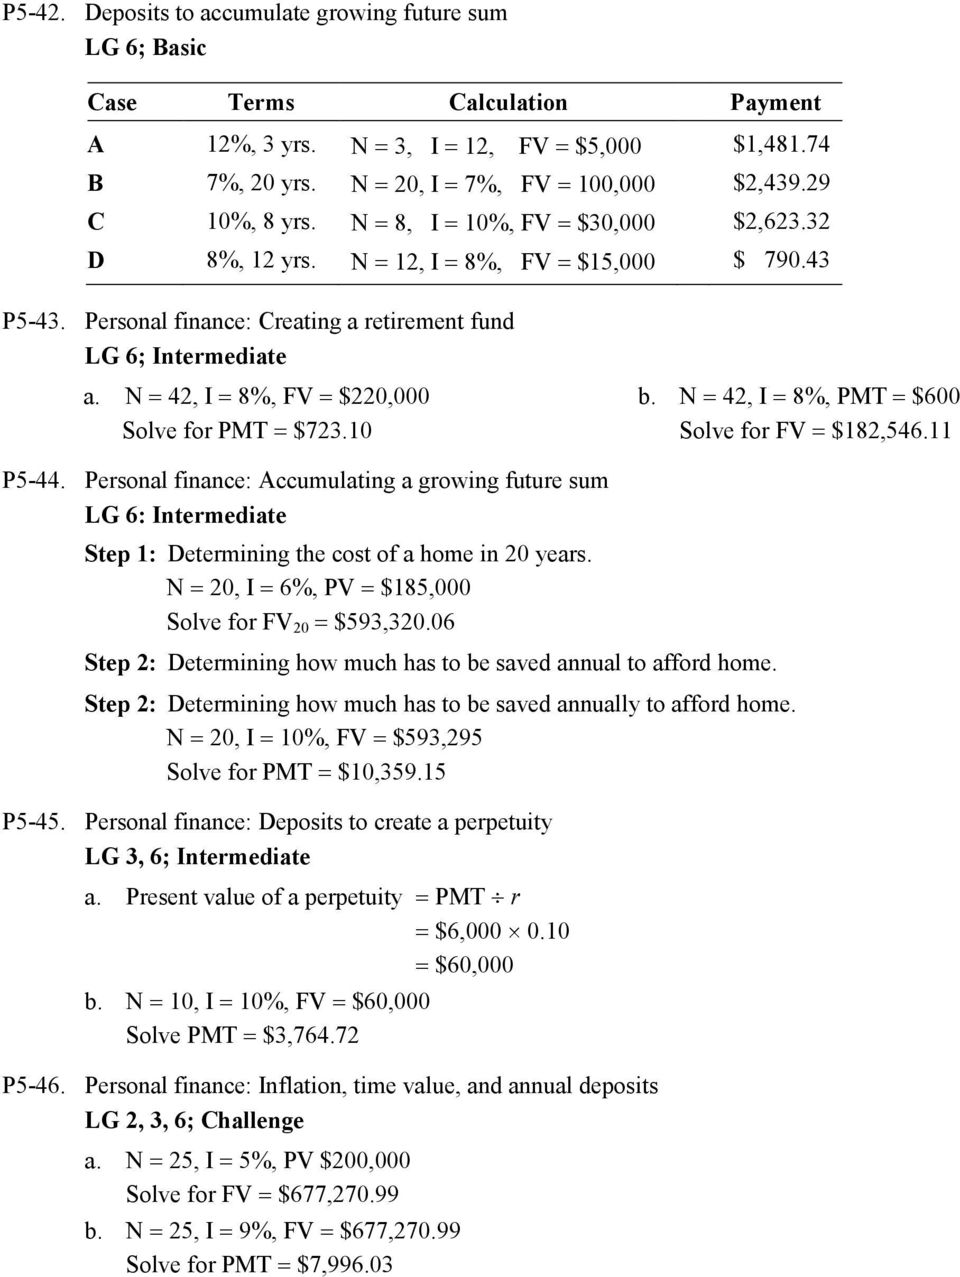 N 42, I 8%, PMT $600 Solve for PMT $723.10 Solve for FV $182,546.11 P5-44. Personal finance: Accumulating a growing future sum LG 6: Intermediate Step 1: Determining the cost of a home in 20 years.